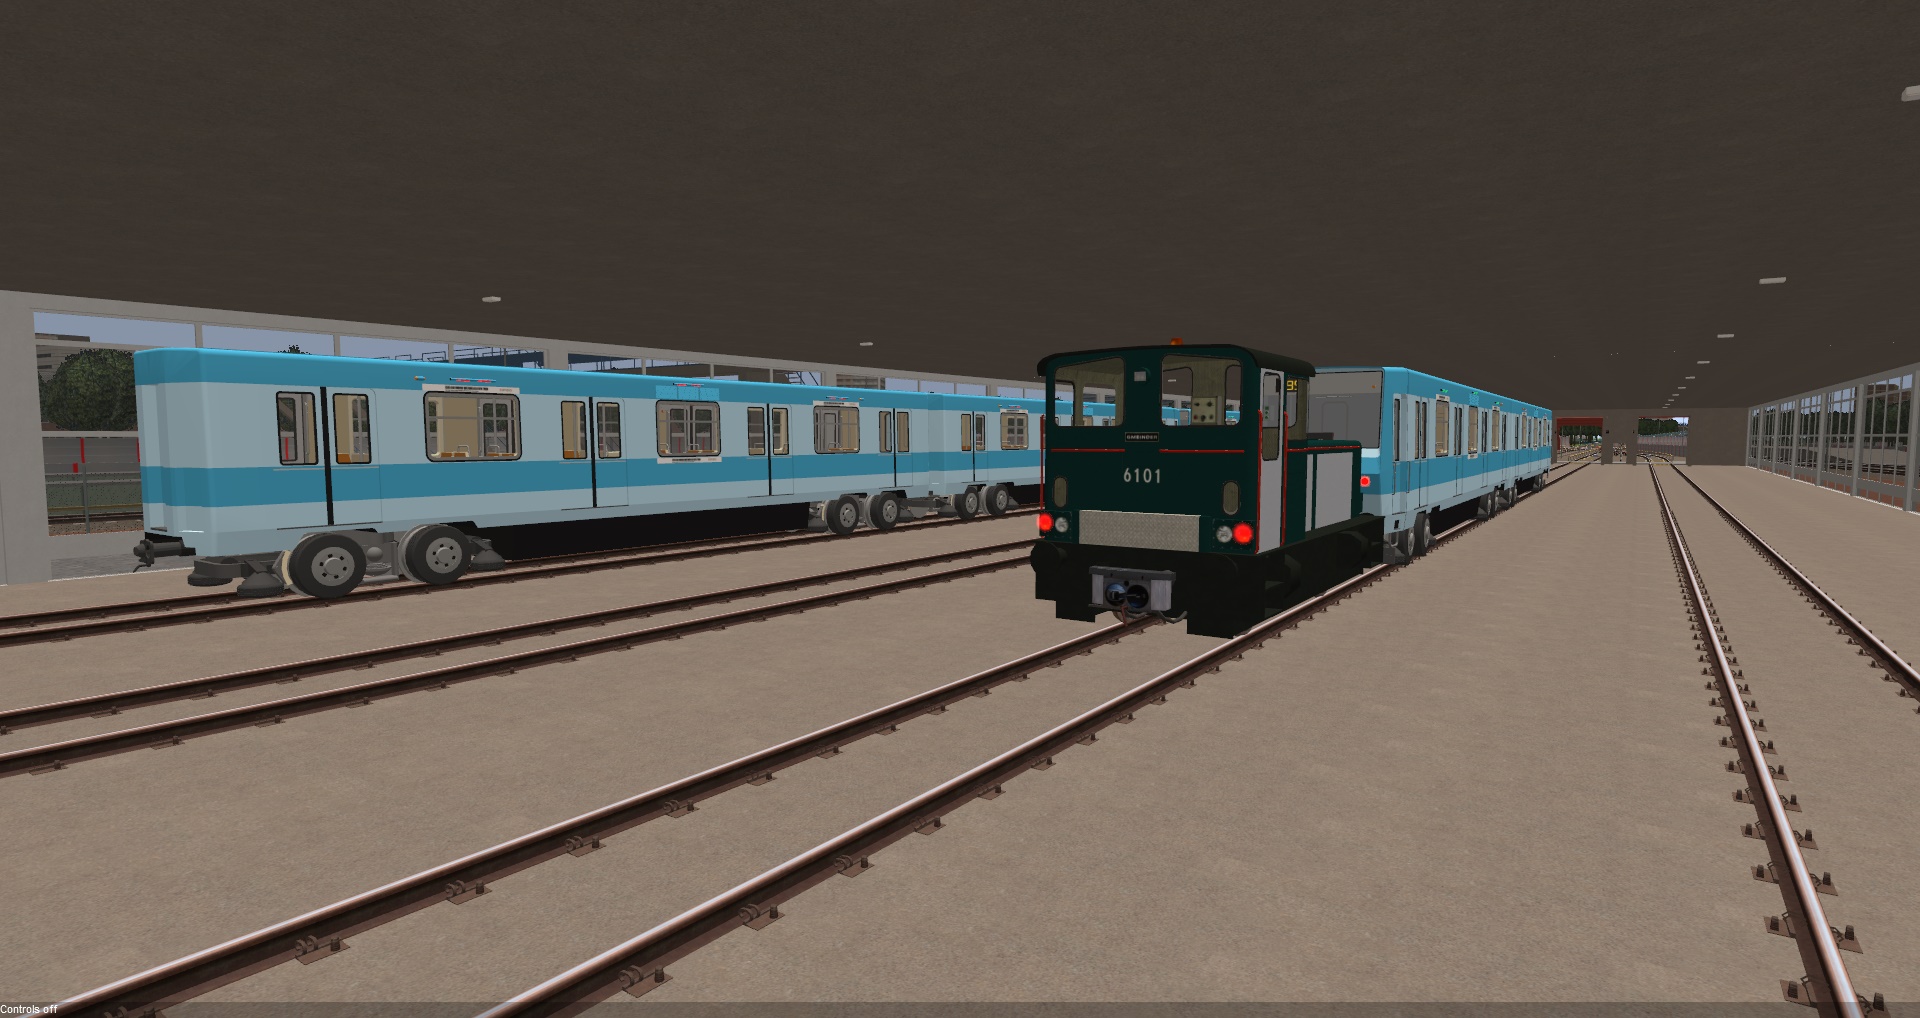 Here you can see the reforming of ex-Santiago NS74 cars. Simvliet received 4 end cars and 2 middle cars for the museum shuttle in 2019, however due to the lower demand, the two former 3-car sets are reformed into a 2-car set, while the remaining cars will be stored indefinitely.